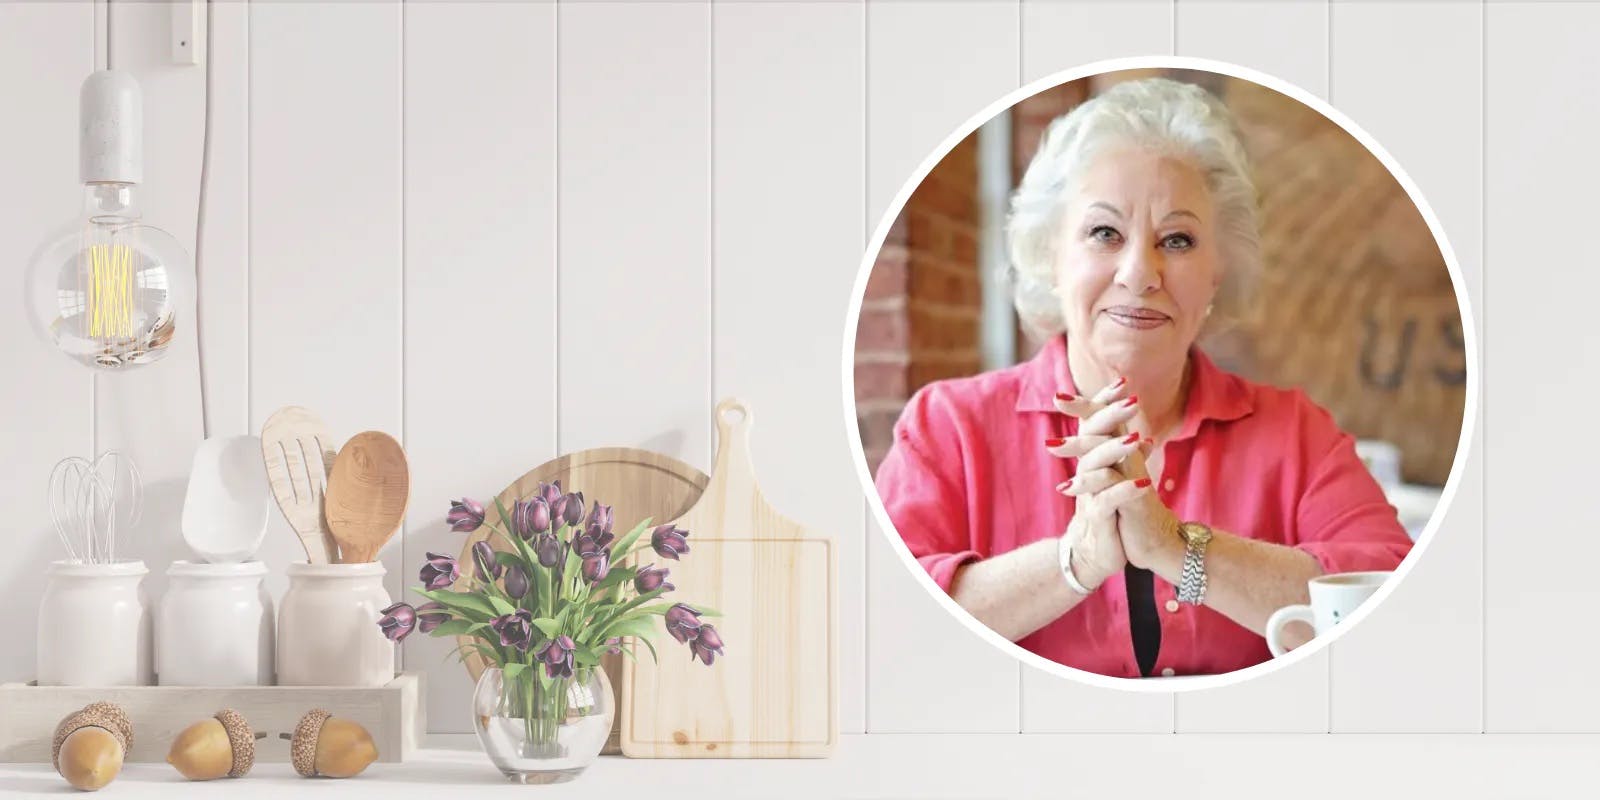 A profile picture of former chef and post polio patient Ina Pinkney within a photo of a purple hued kitchen.